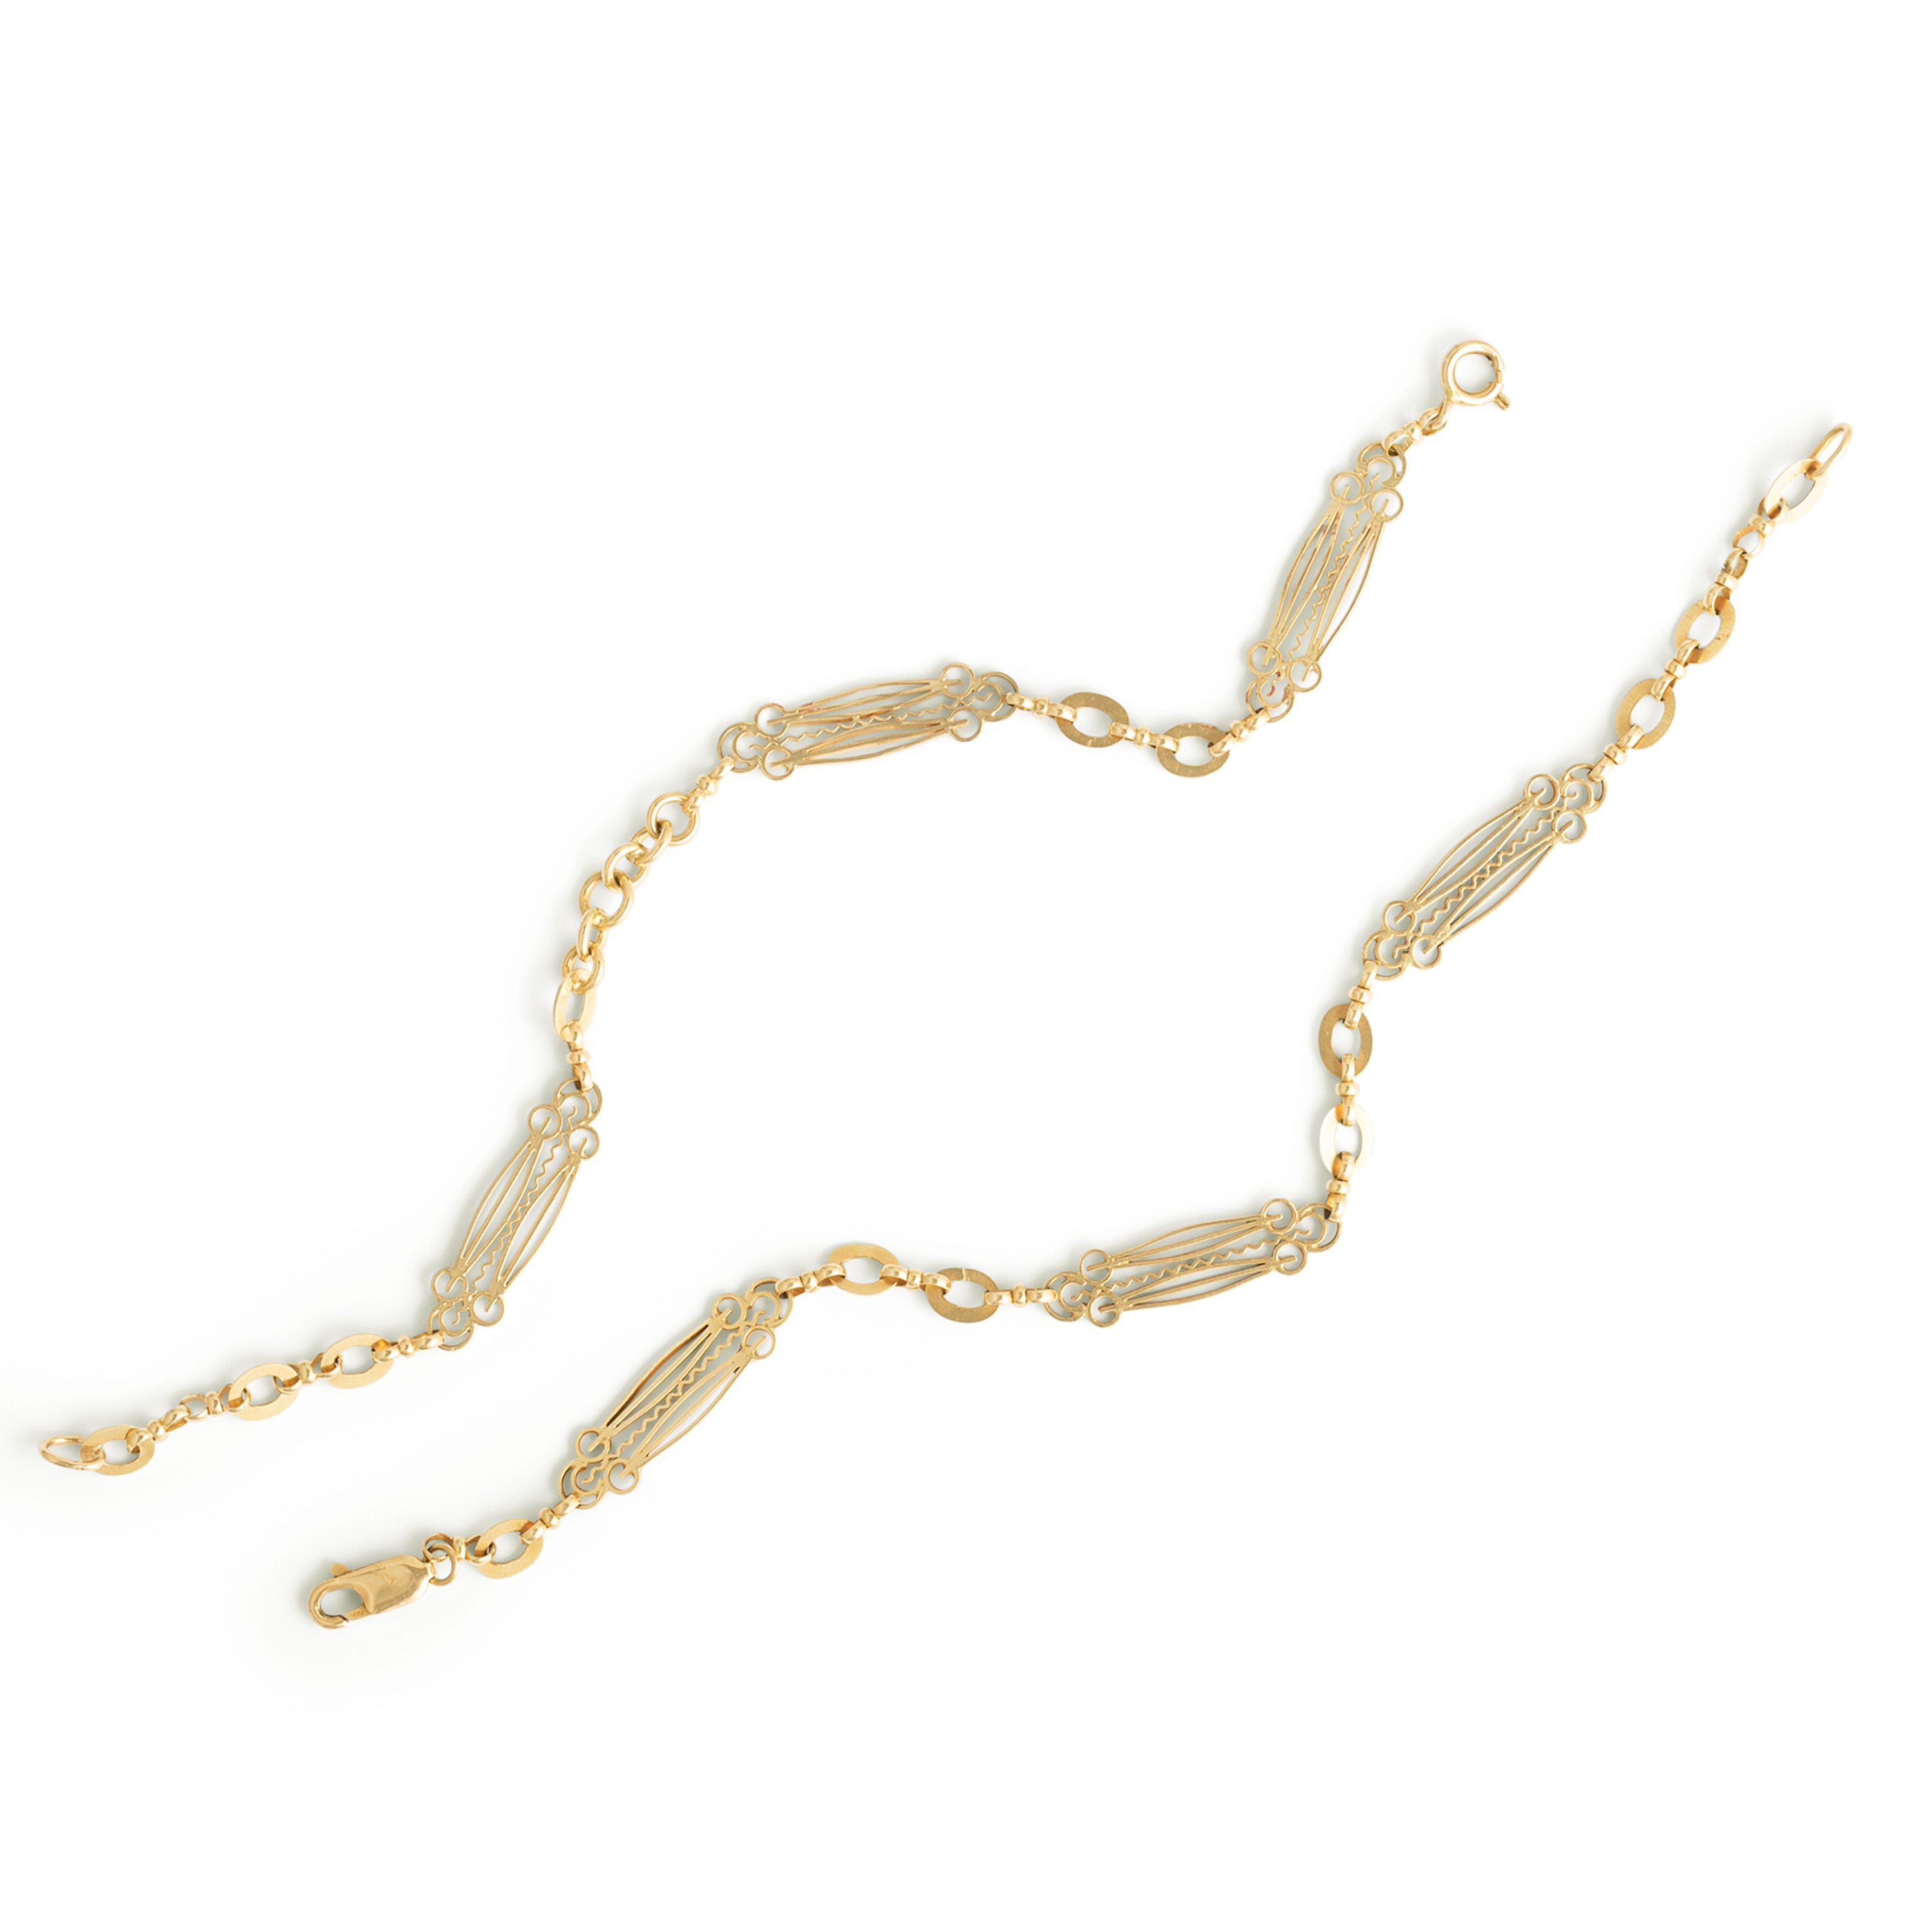 Ornate 14k Gold Chain Necklace And Convertible Bracelets